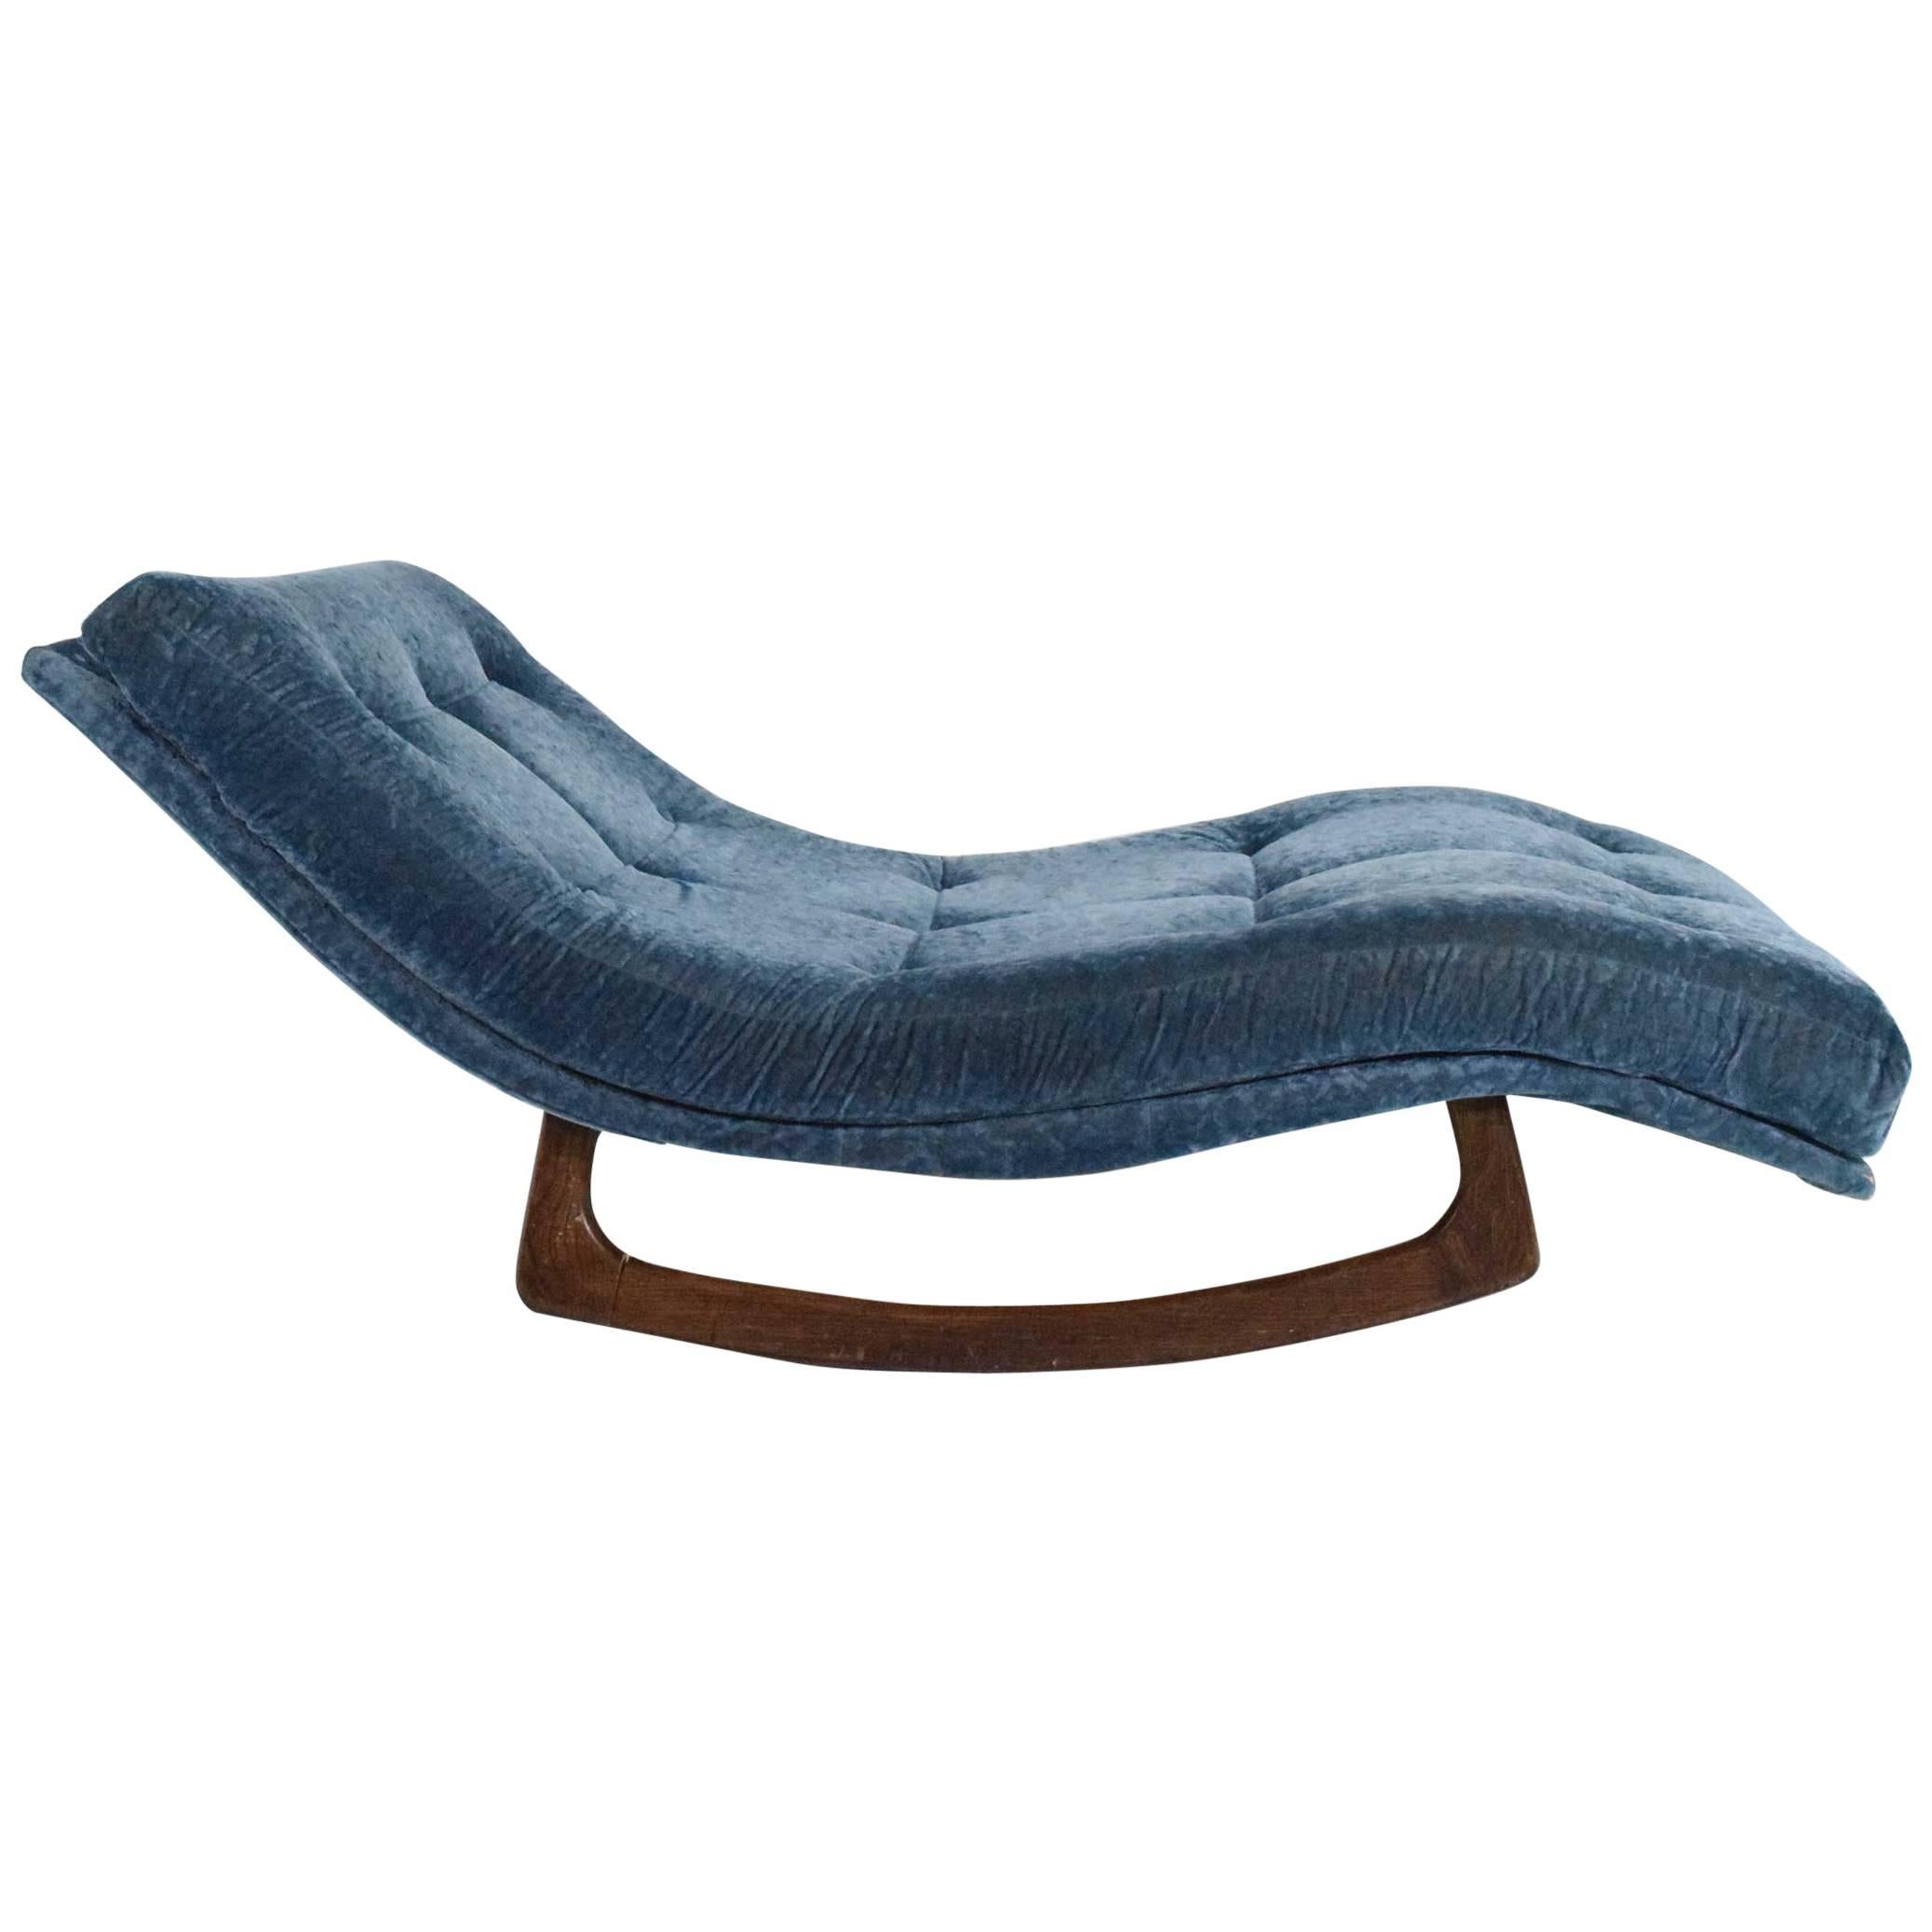 Adrian Pearsall Double Wide Rocking Chaise